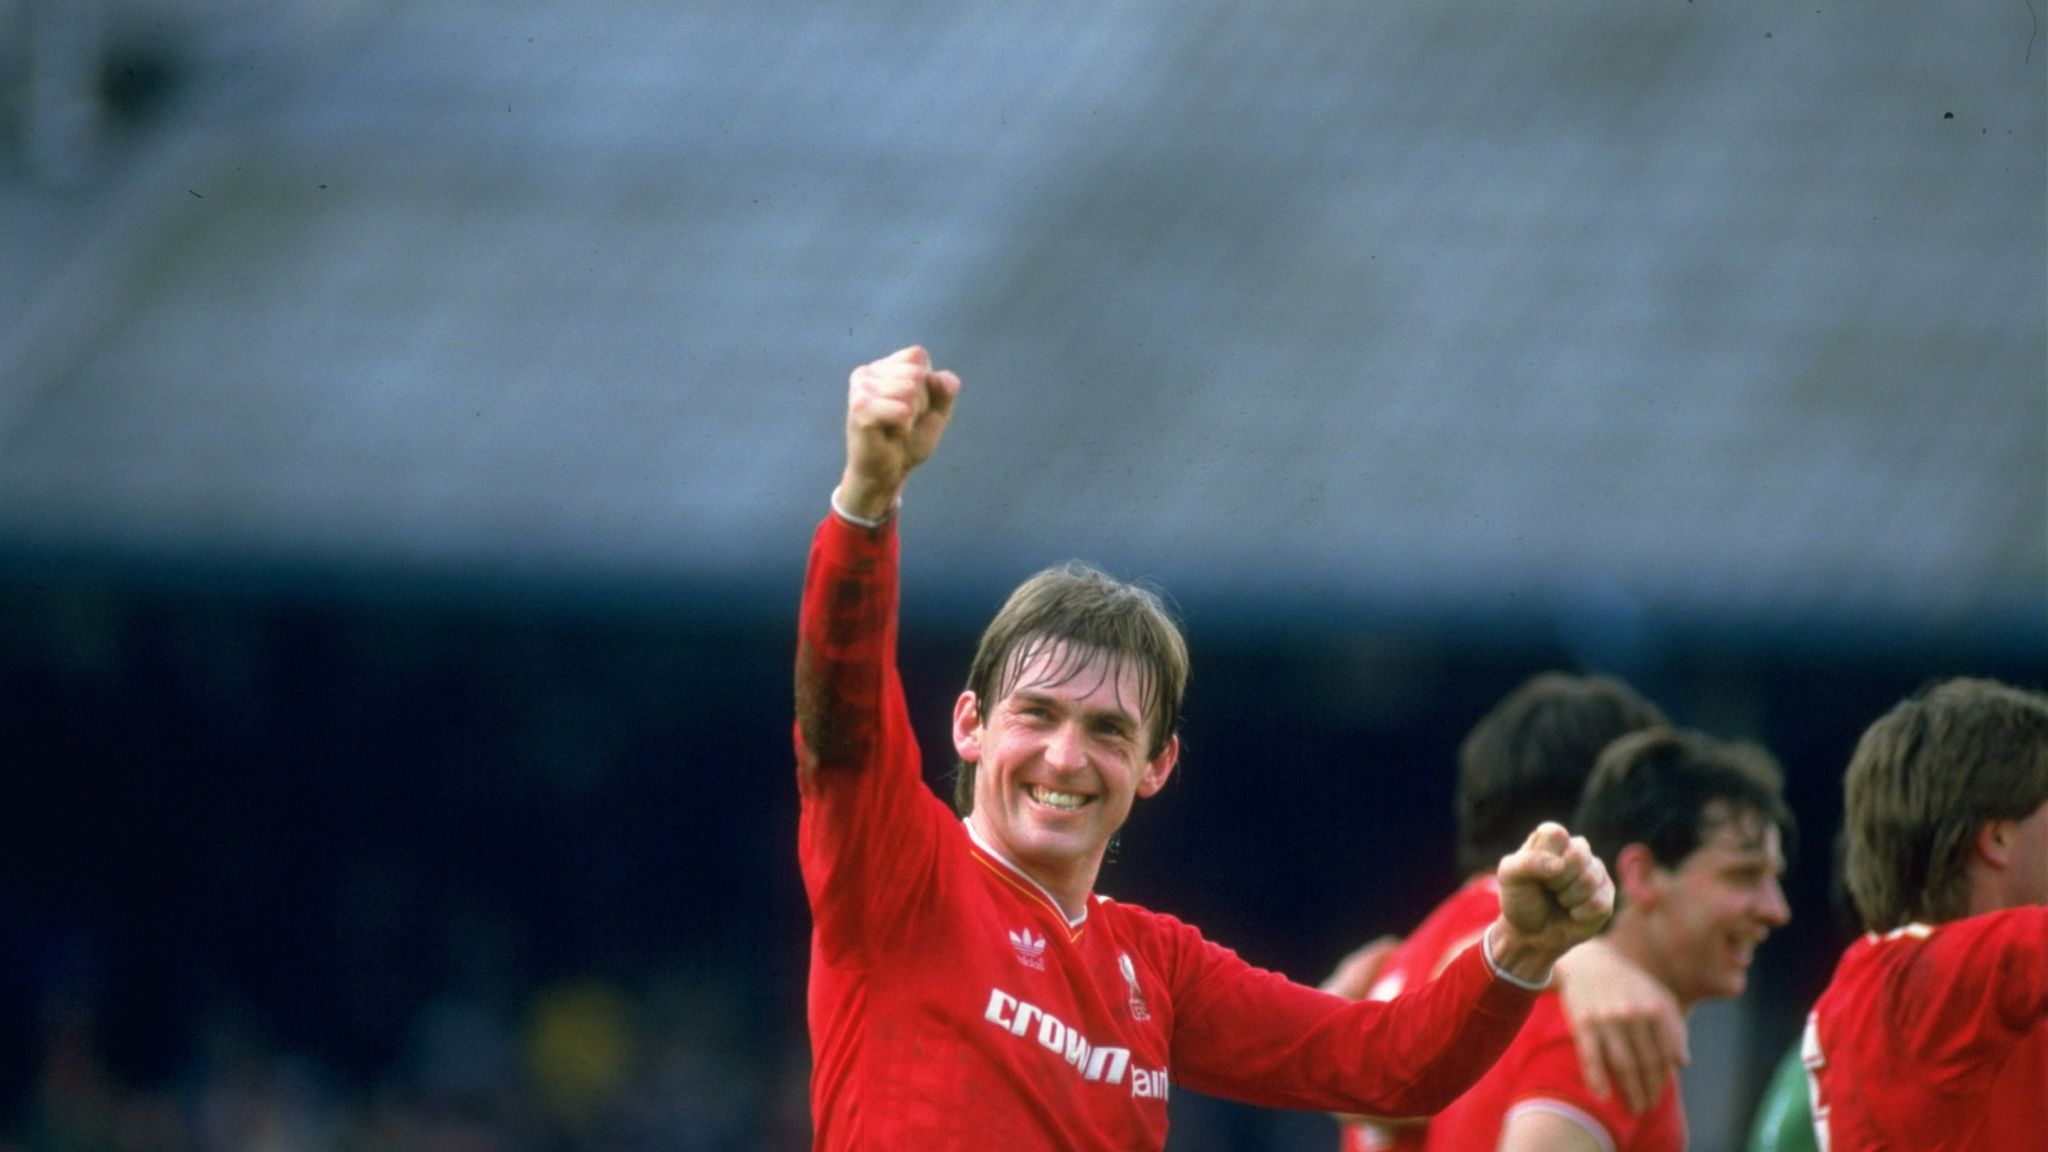 Liverpool legend Sir Kenny Dalglish's most memorable career moments | Football News | Sky Sports